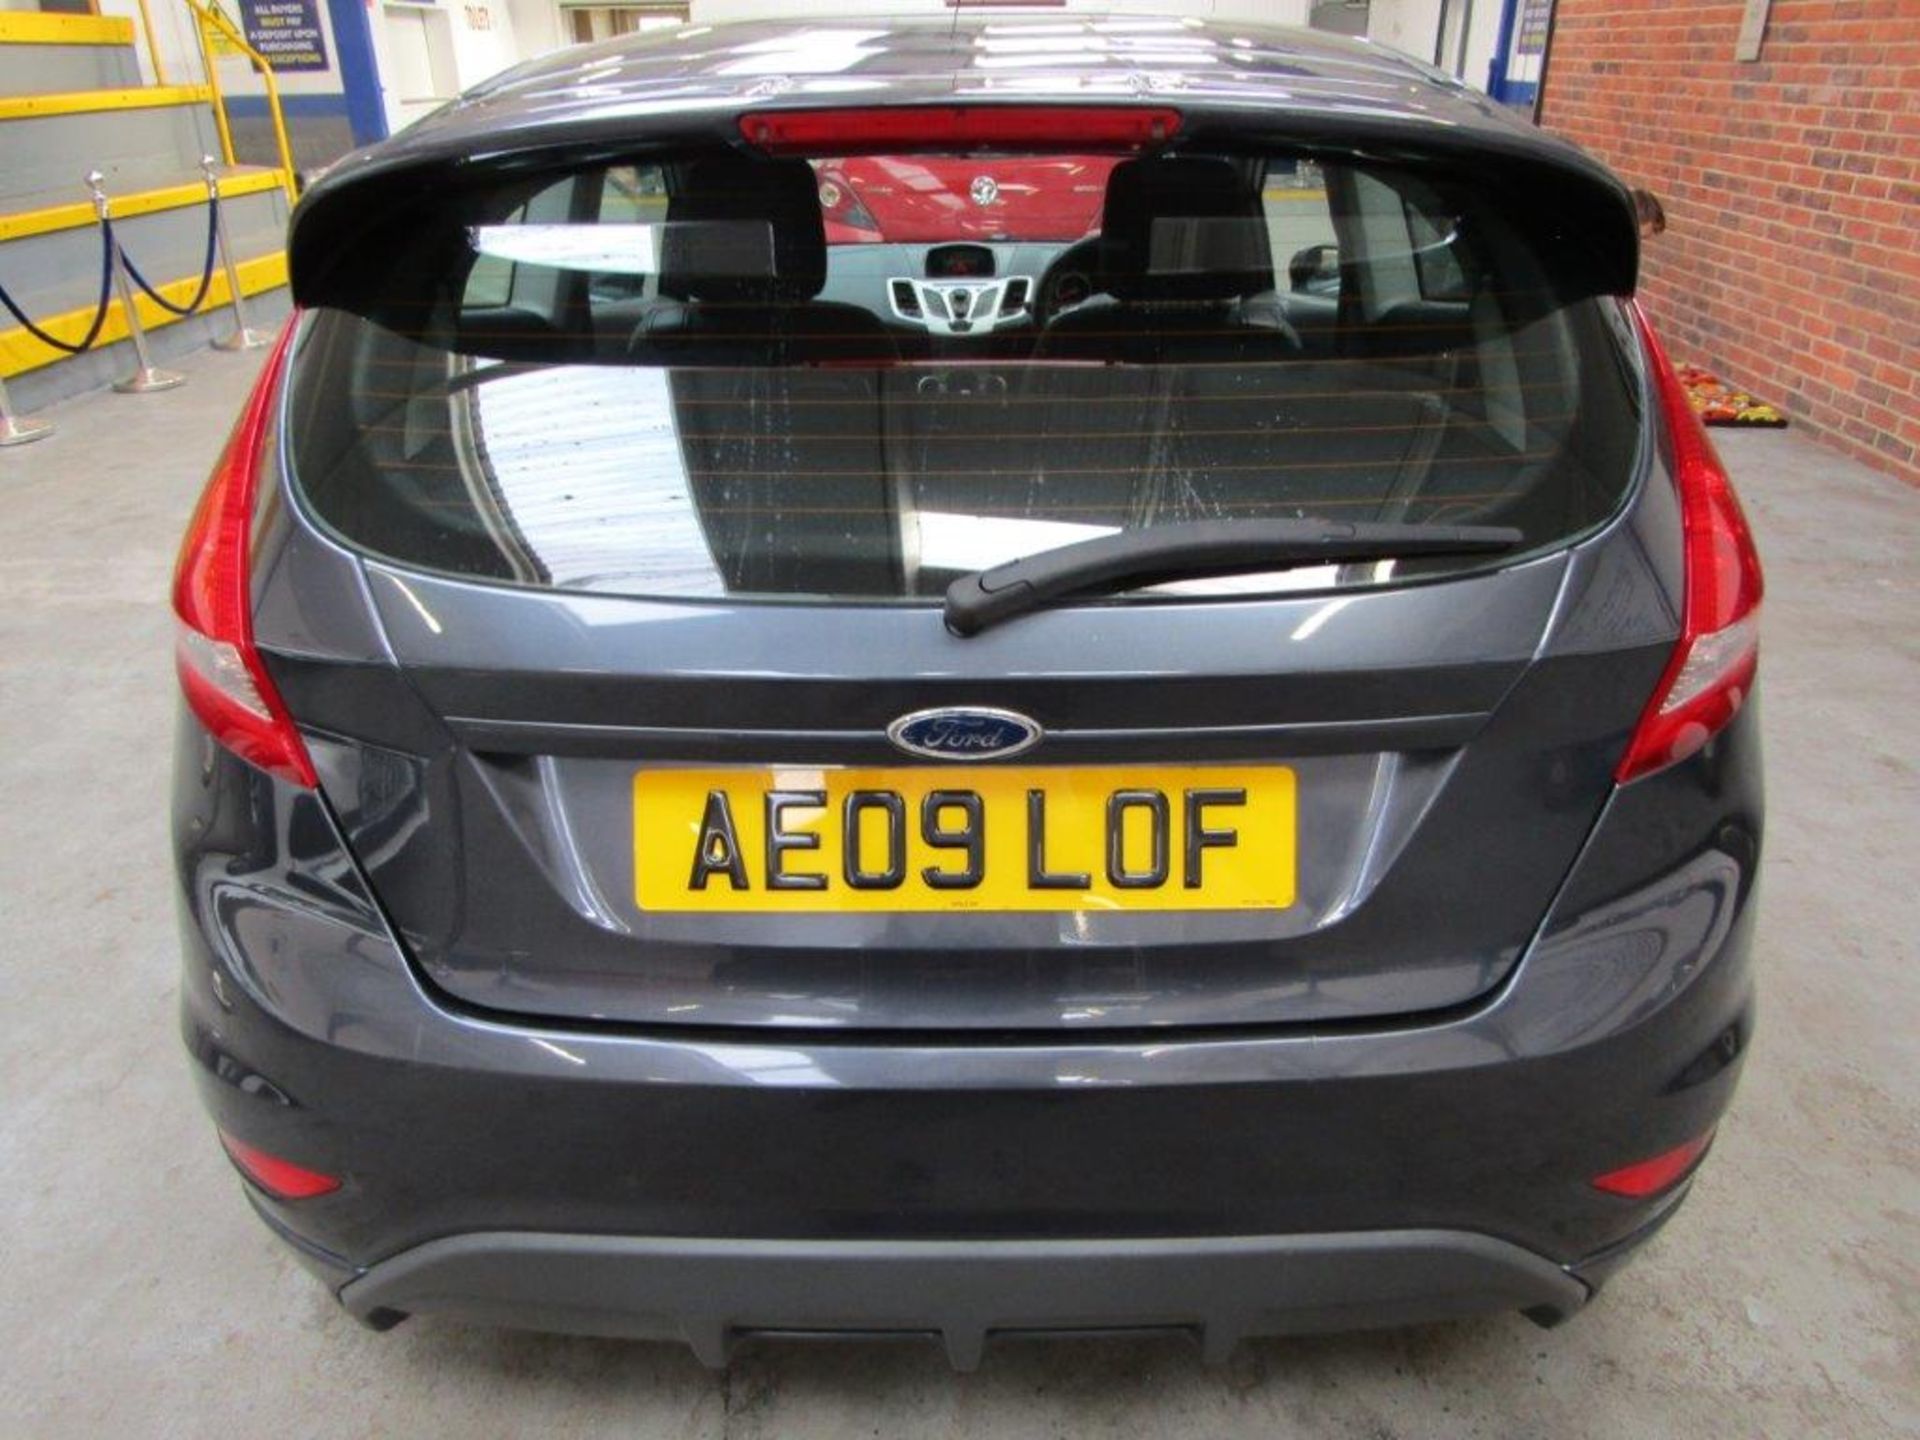 09 09 Ford Fiesta - Image 10 of 21